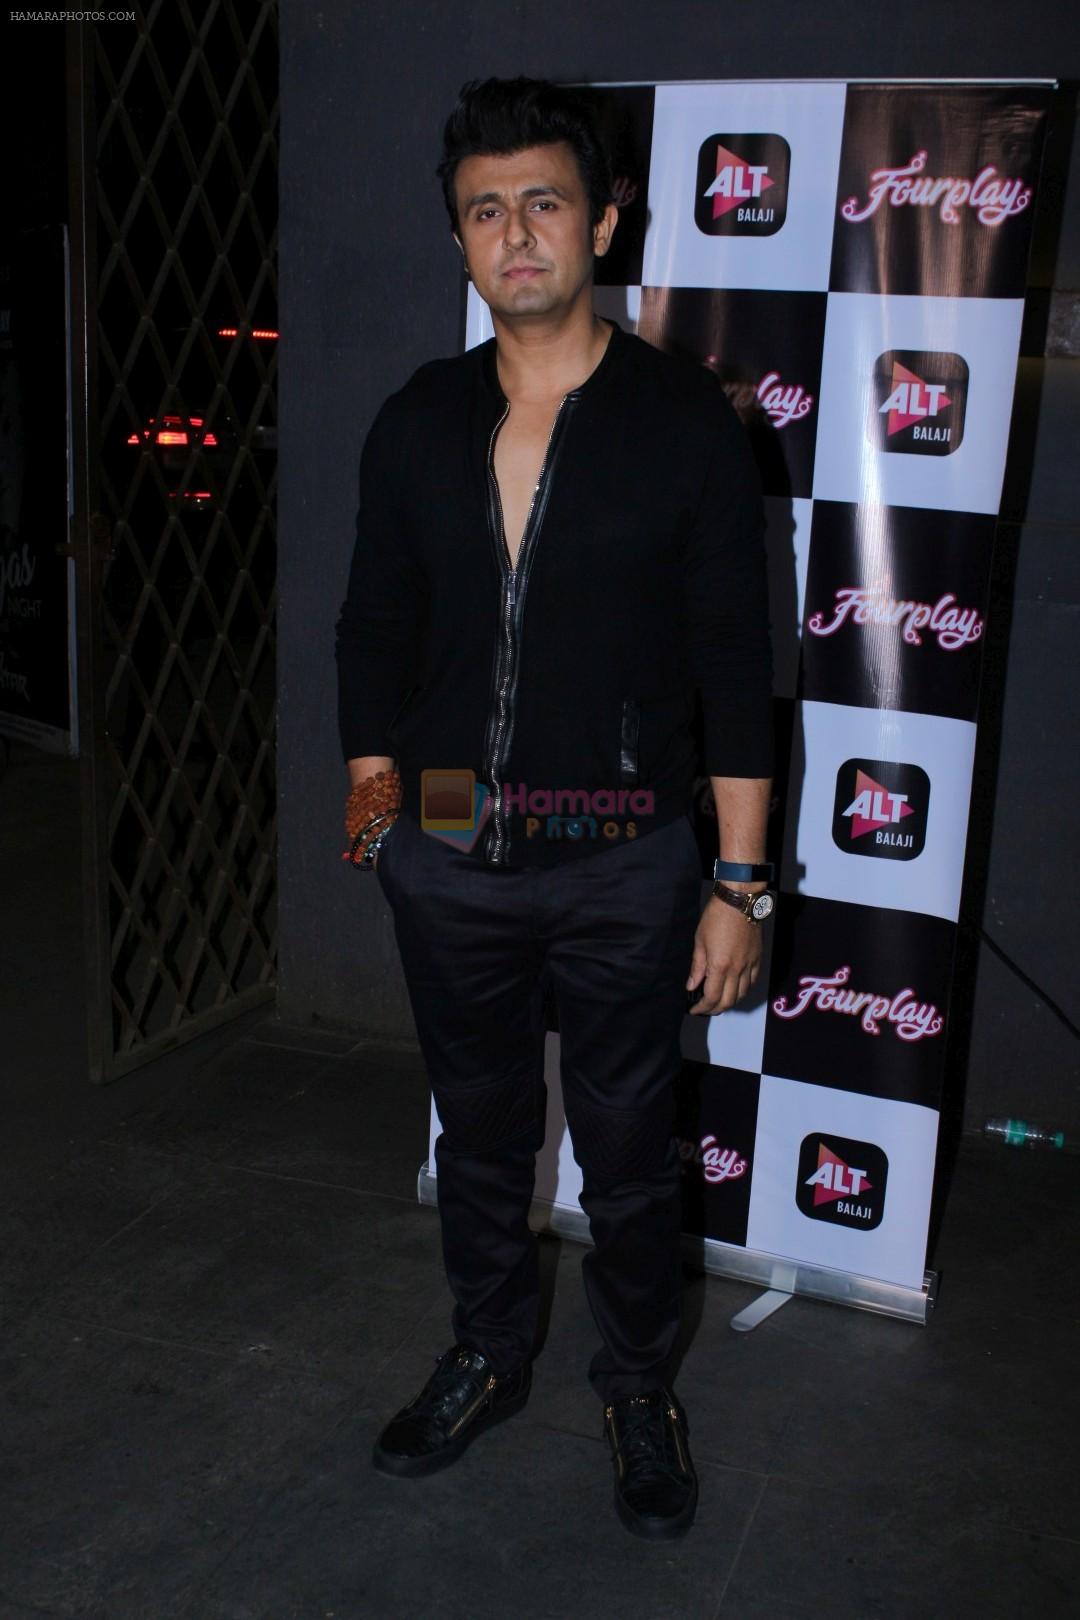 Sonu Nigam at the Celebration Of Pre Launch Of The Altbalaji's Next Web Show Four Play on 11th Dec 2017